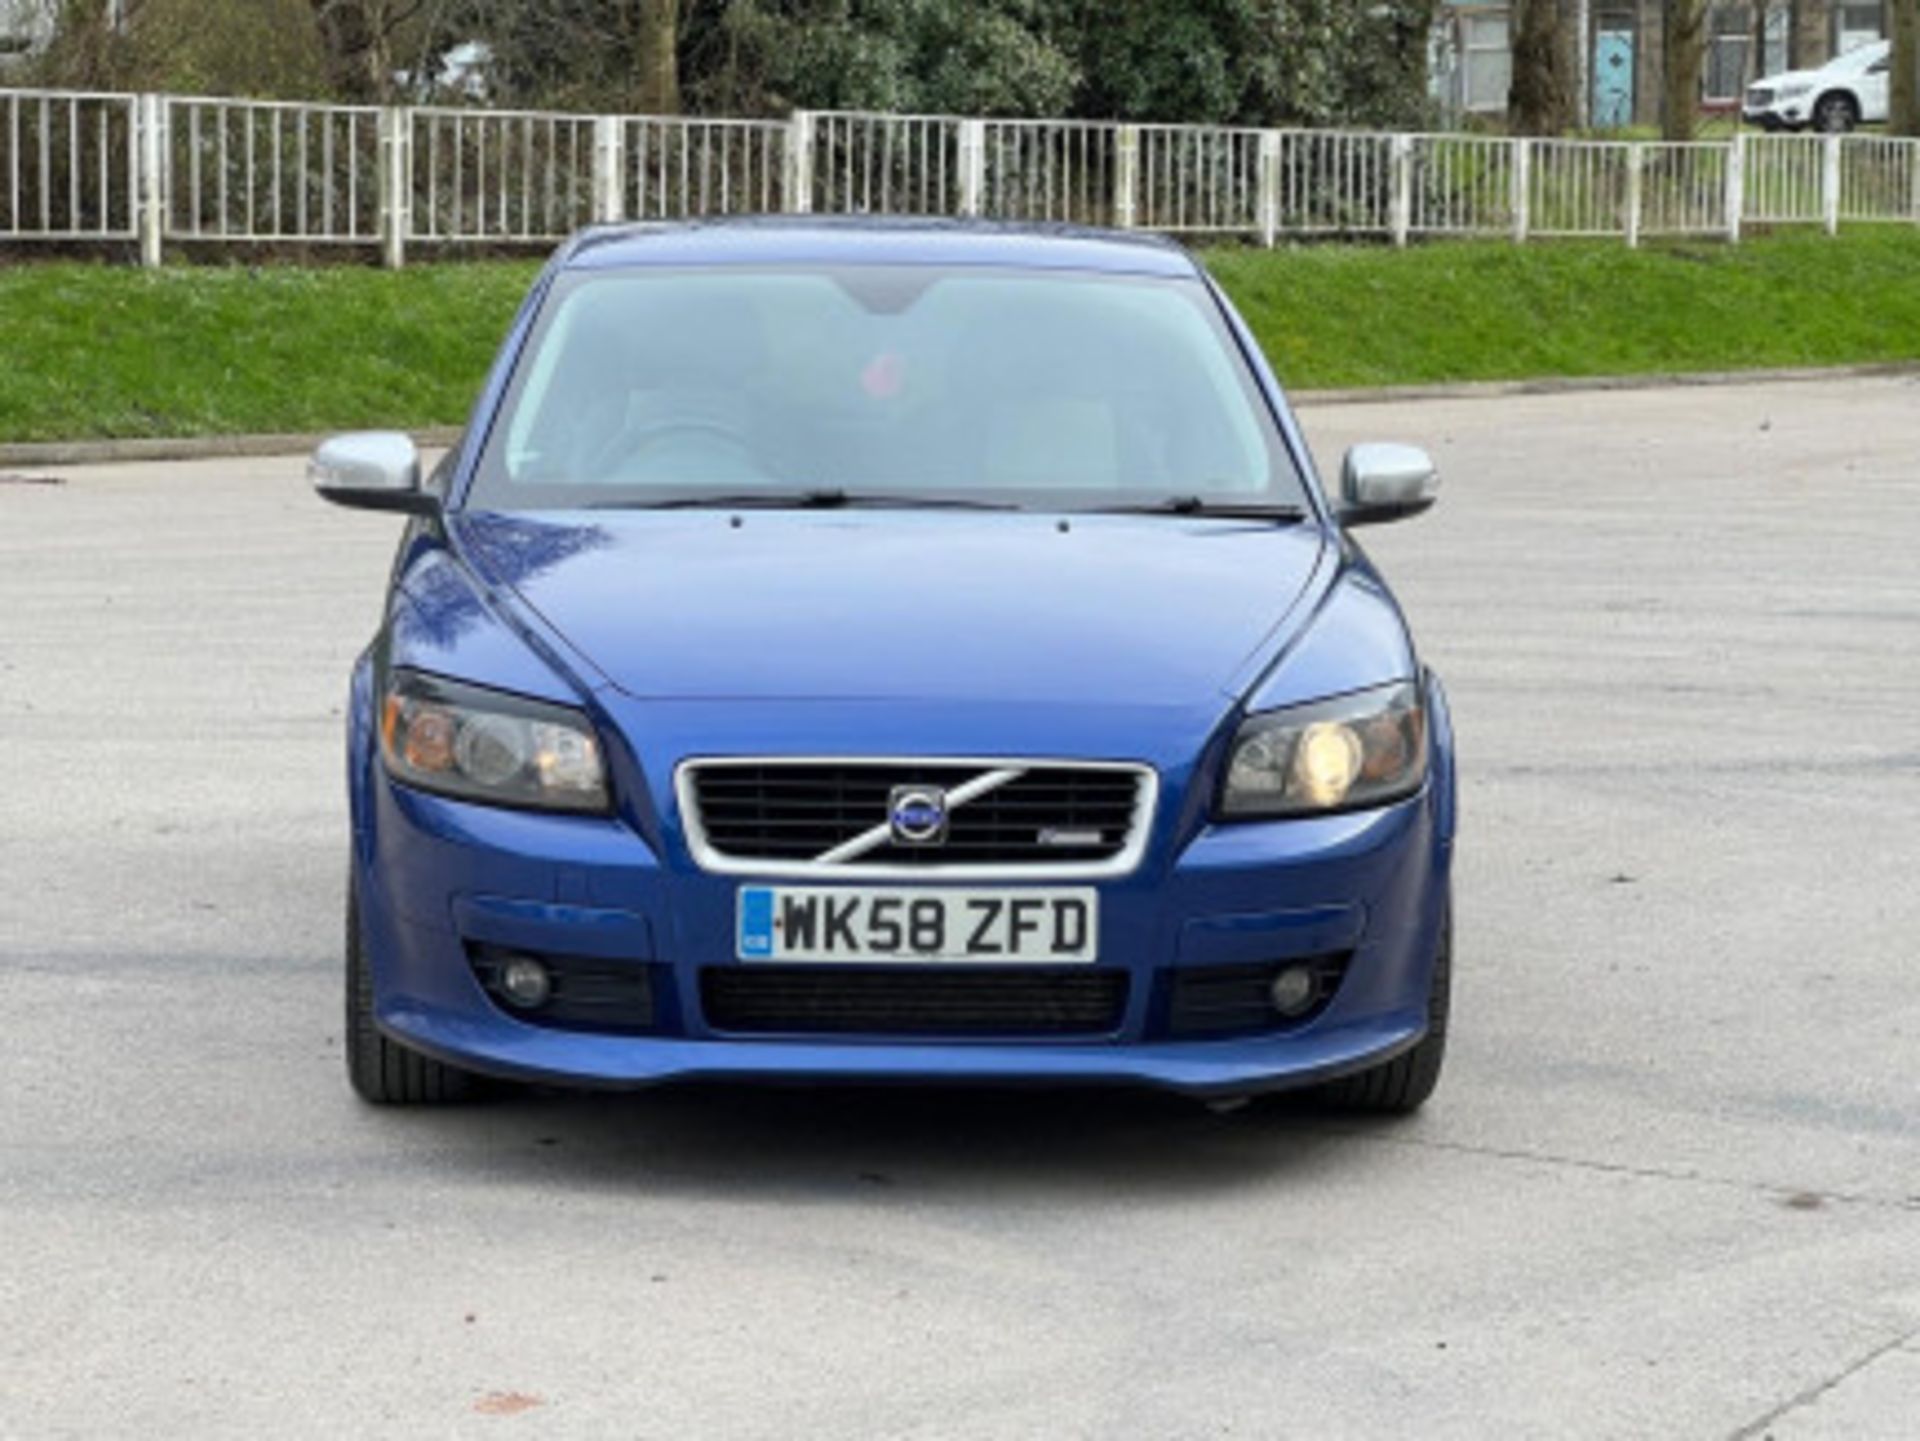 VOLVO C30 2.0D R-DESIGN SPORT 2DR - SPORTY AND LUXURIOUS COMPACT CAR >>--NO VAT ON HAMMER--<< - Image 31 of 71